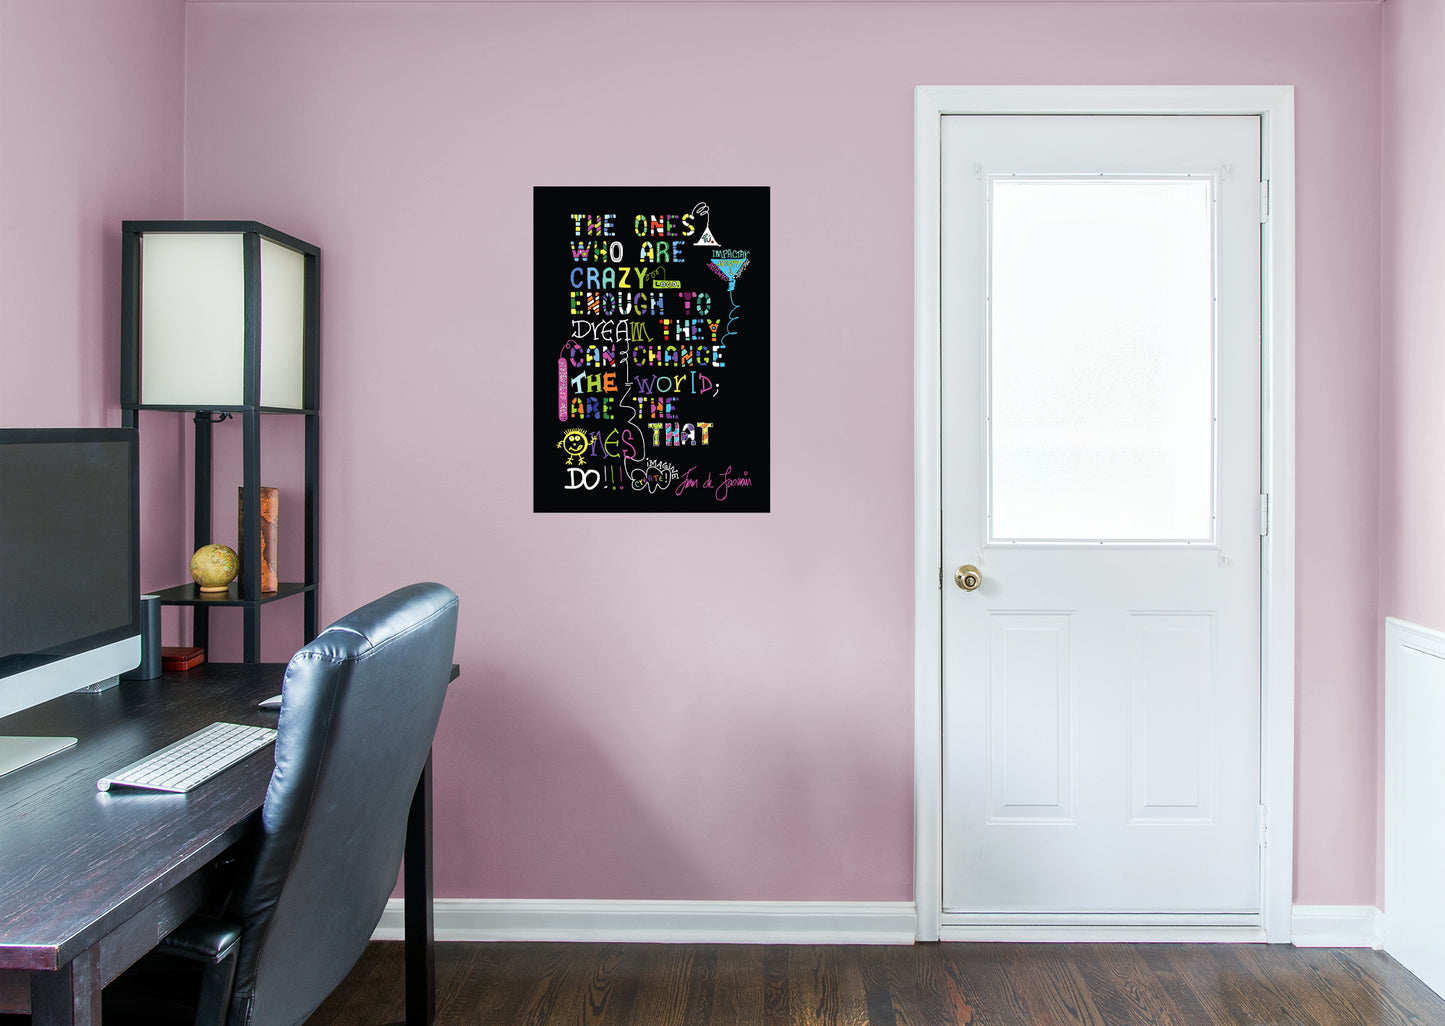 Dream Big Art:  The Ones Who Are Crazy Mural        - Officially Licensed Juan de Lascurain Removable Wall   Adhesive Decal